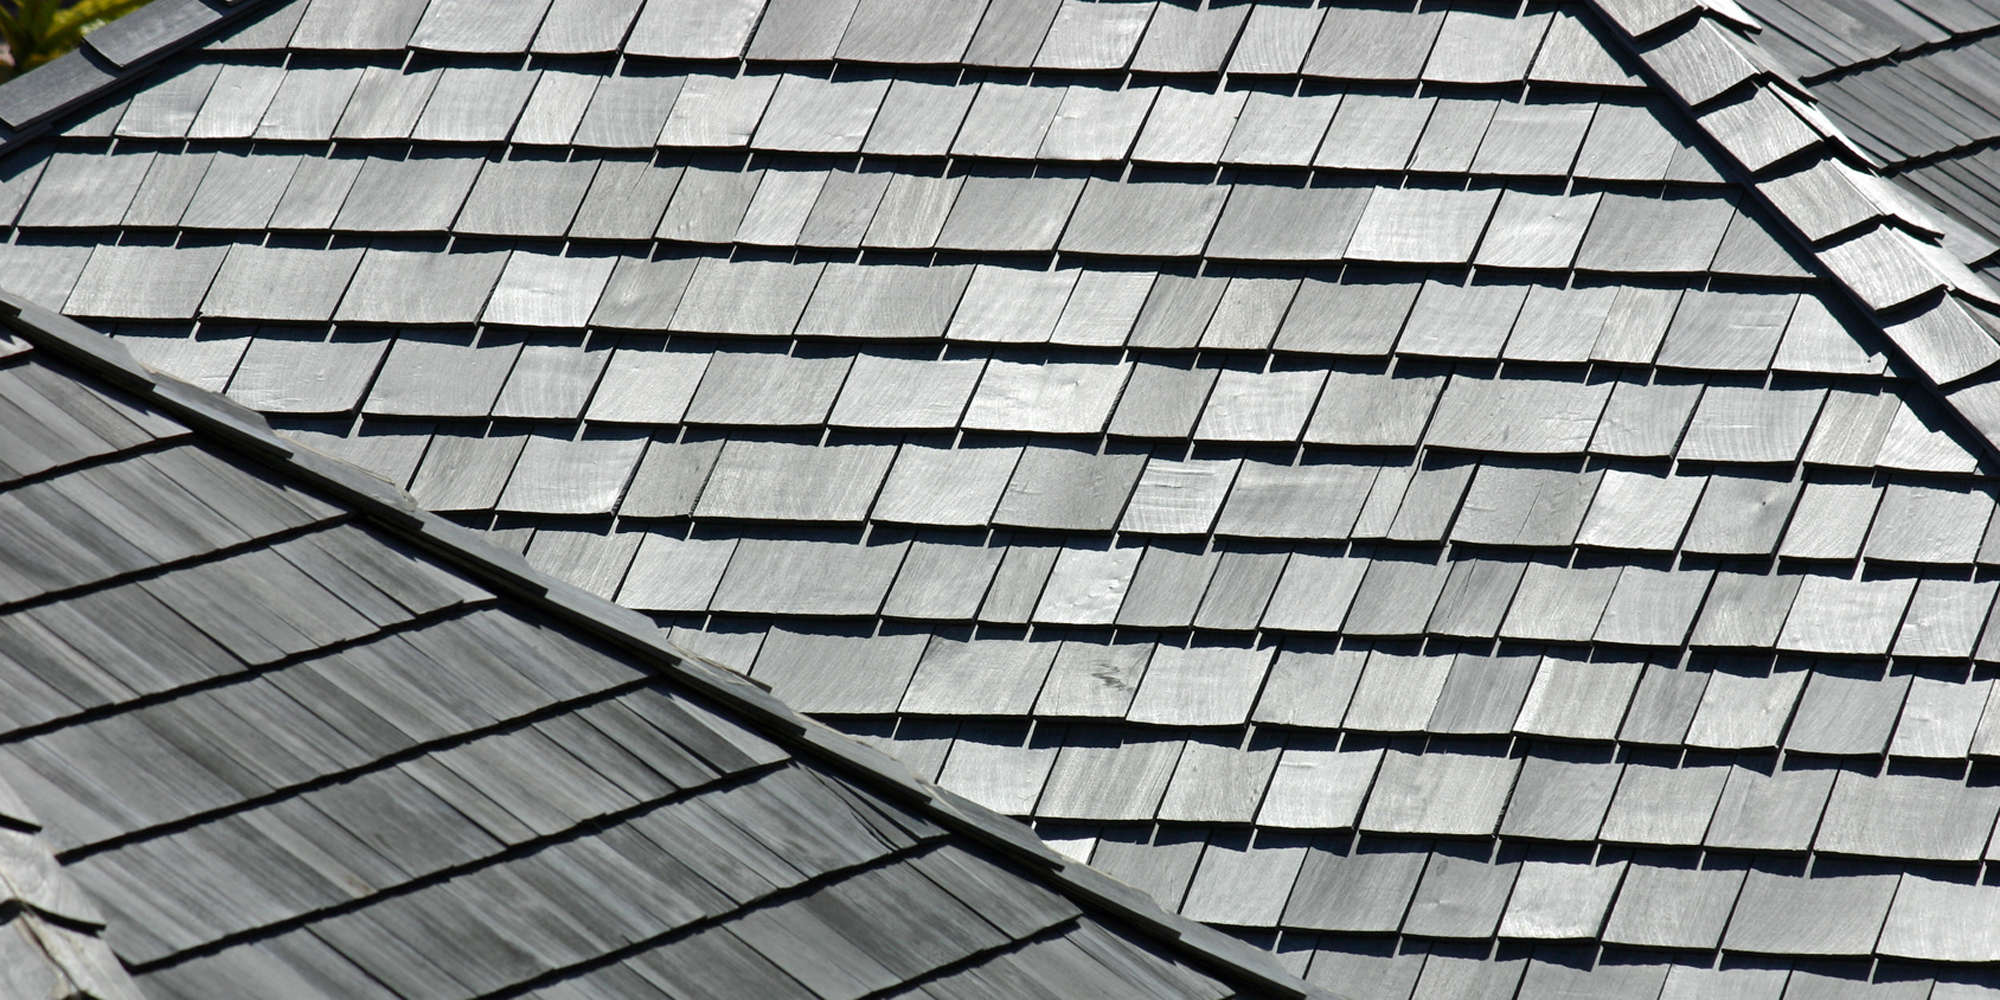 Shingles on a roof